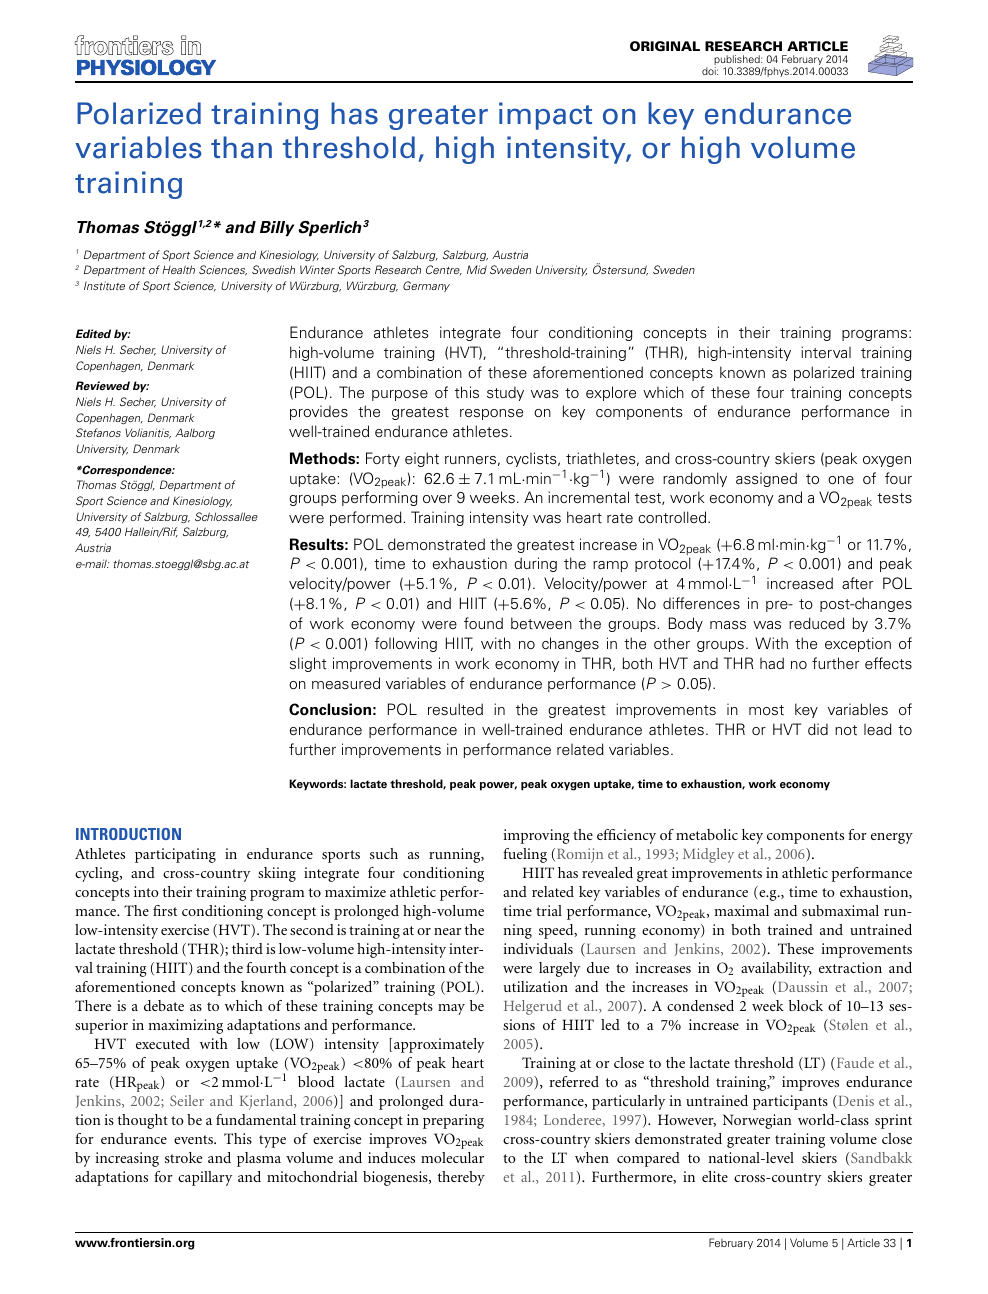 Polarized training has greater on key endurance variables than threshold, high intensity, or high volume – topic of research paper in Biological sciences. Download scholarly article PDF and read for